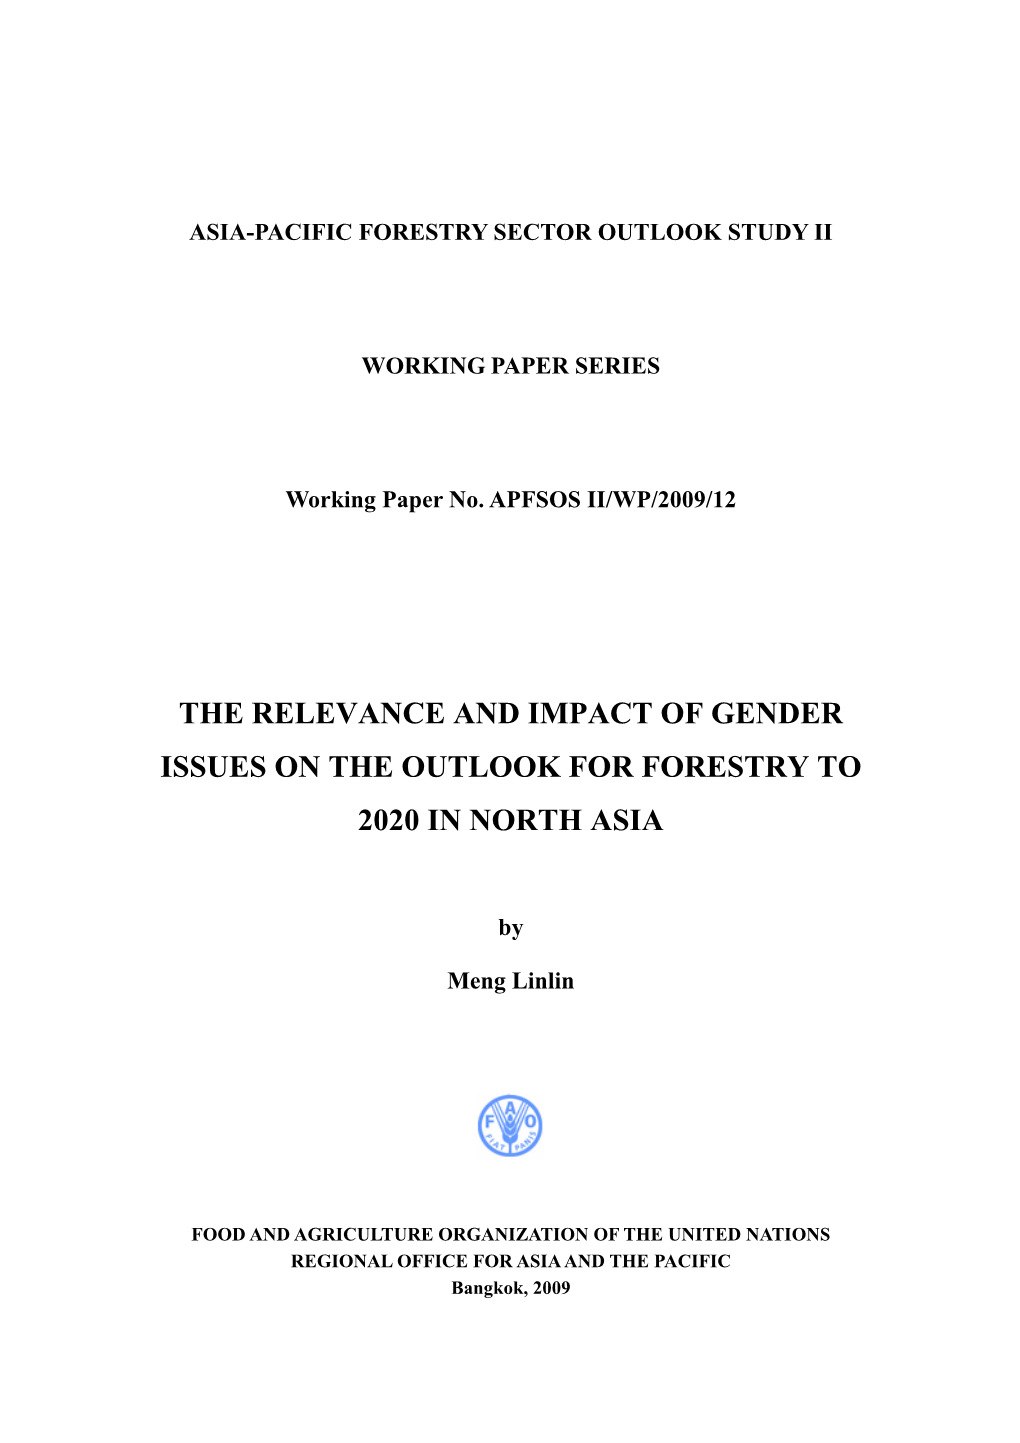 The Relevance and Impact of Gender Issues on the Outlook for Forestry to 2020 in North Asia